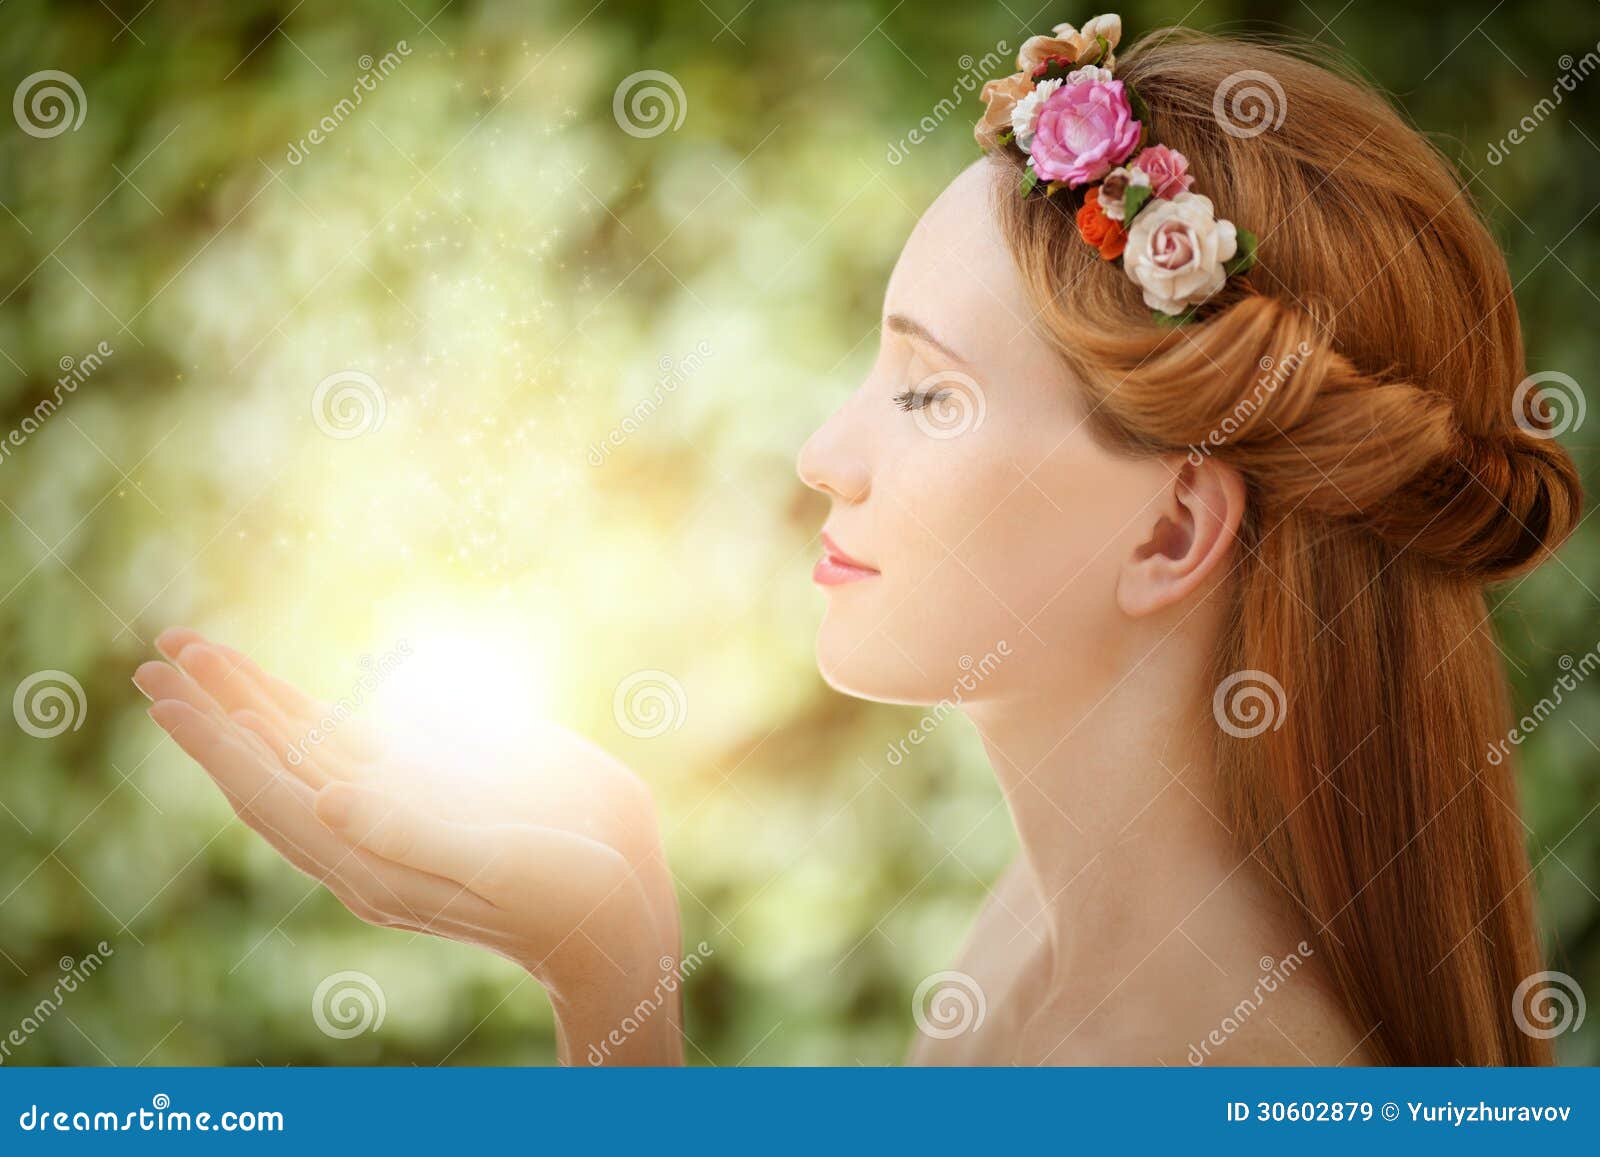 Beautiful Fairy Woman with Glow in Hands Stock Image - Image of ...